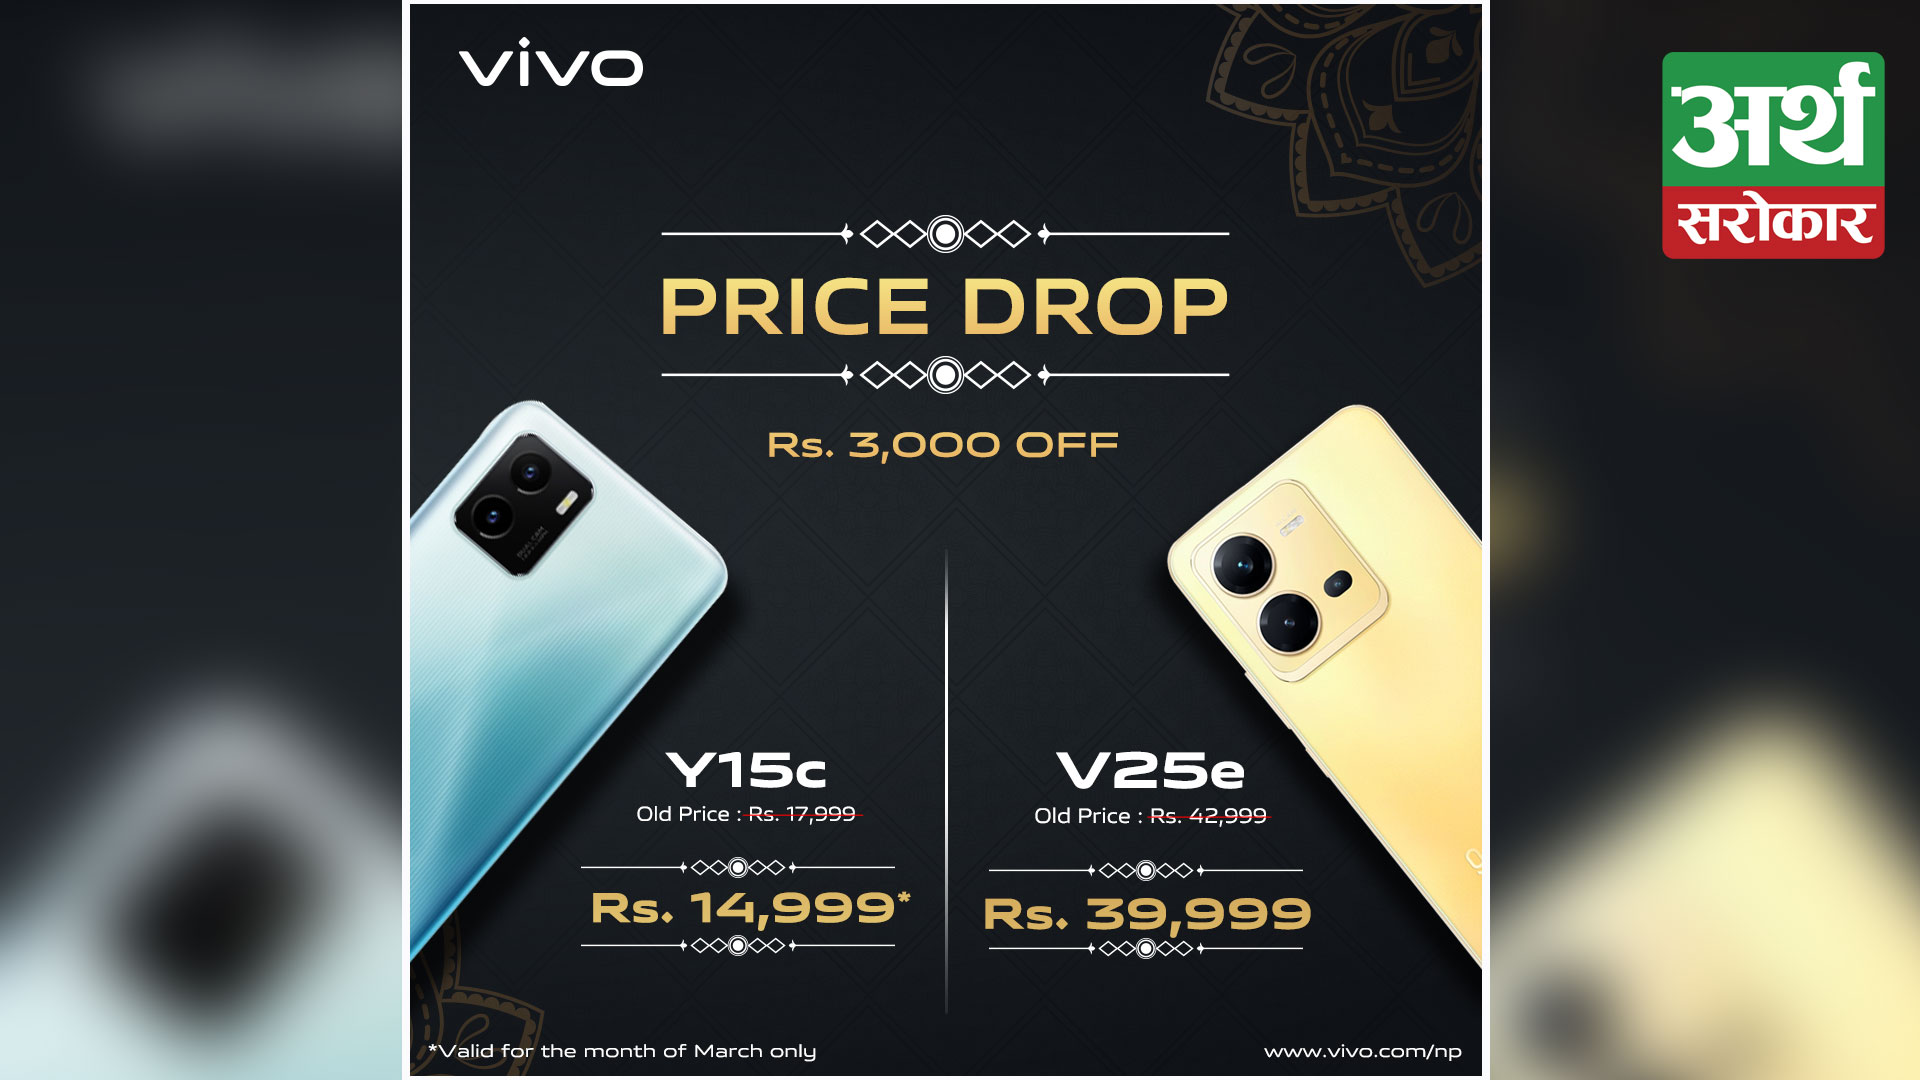 Vivo announces price-drop for the gorgeous V25e and Cool Y15C smartphones in Nepal